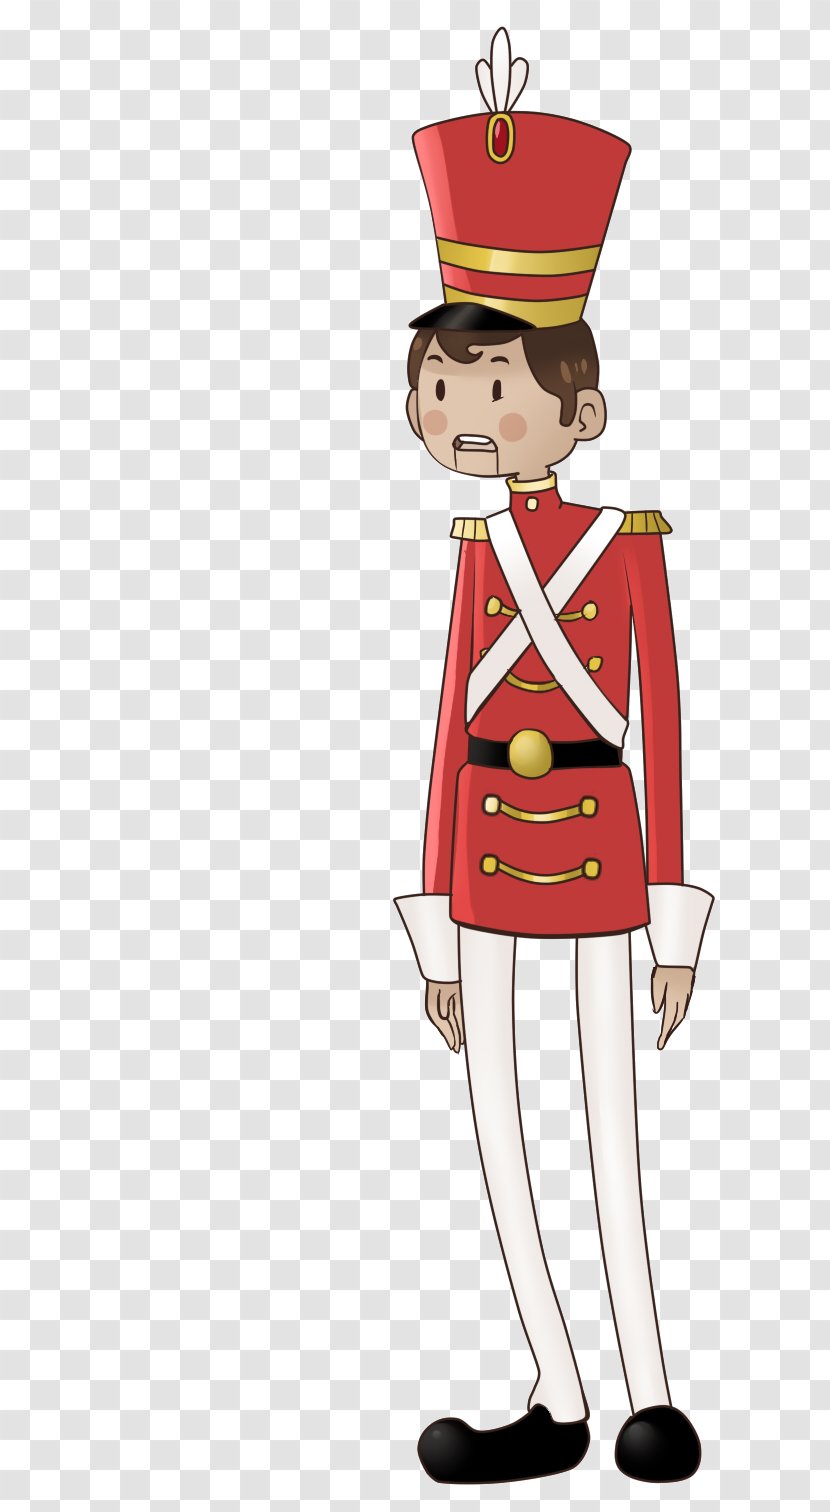 Costume Design Cartoon Character Uniform - Toy Soldiers Transparent PNG